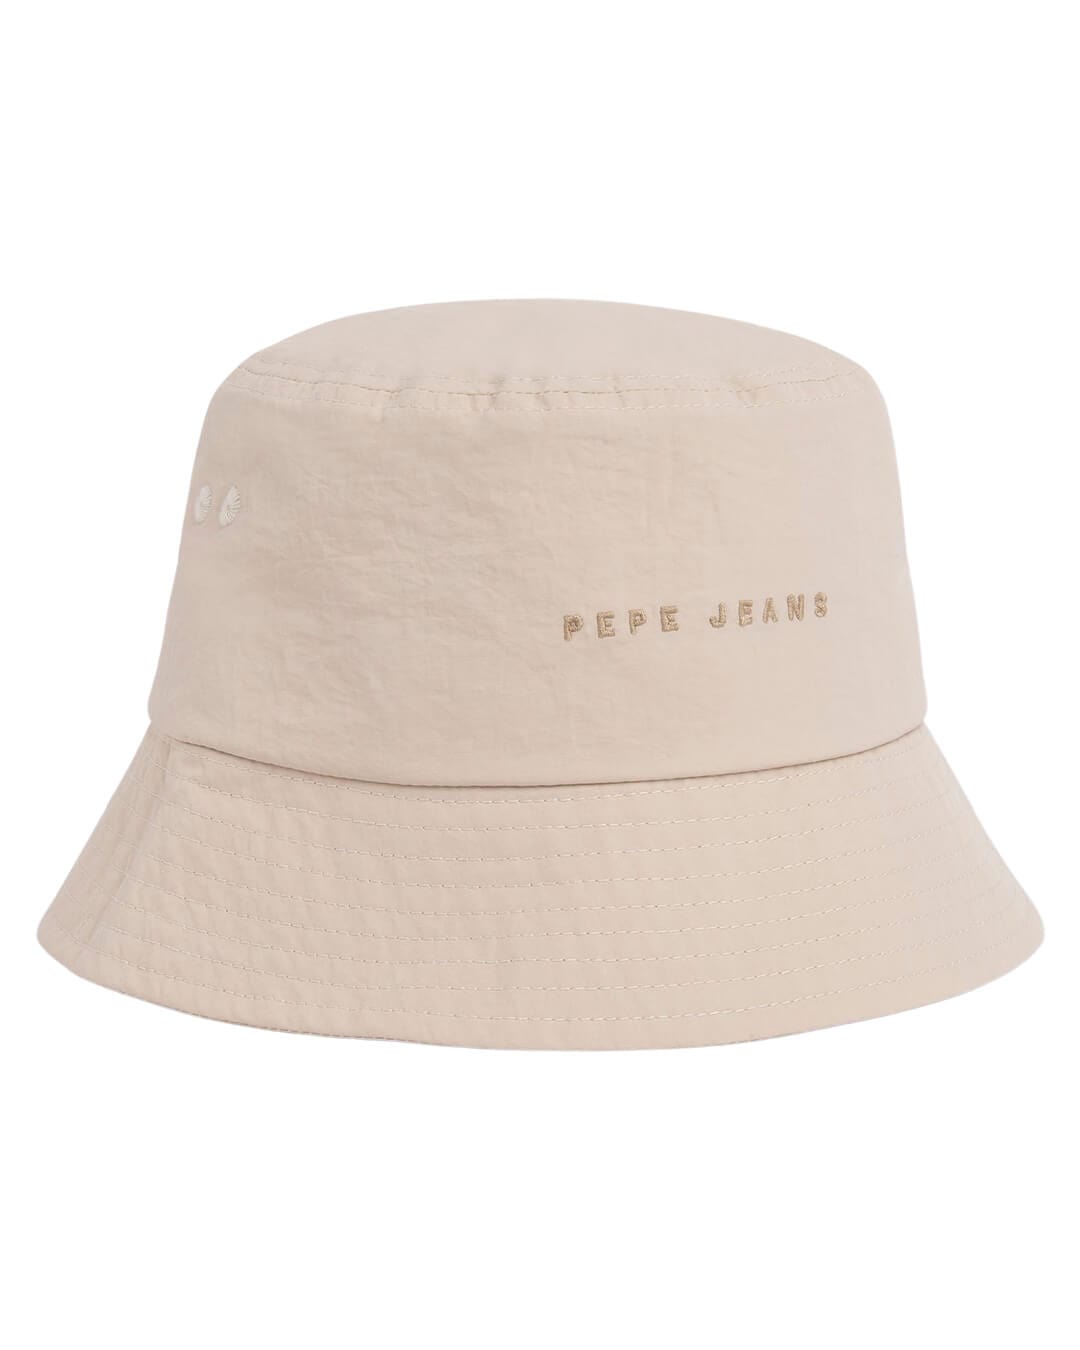 Pepe Jeans Caps ONE Pepe Jeans Beige Embroidered Logo Bucket Hat